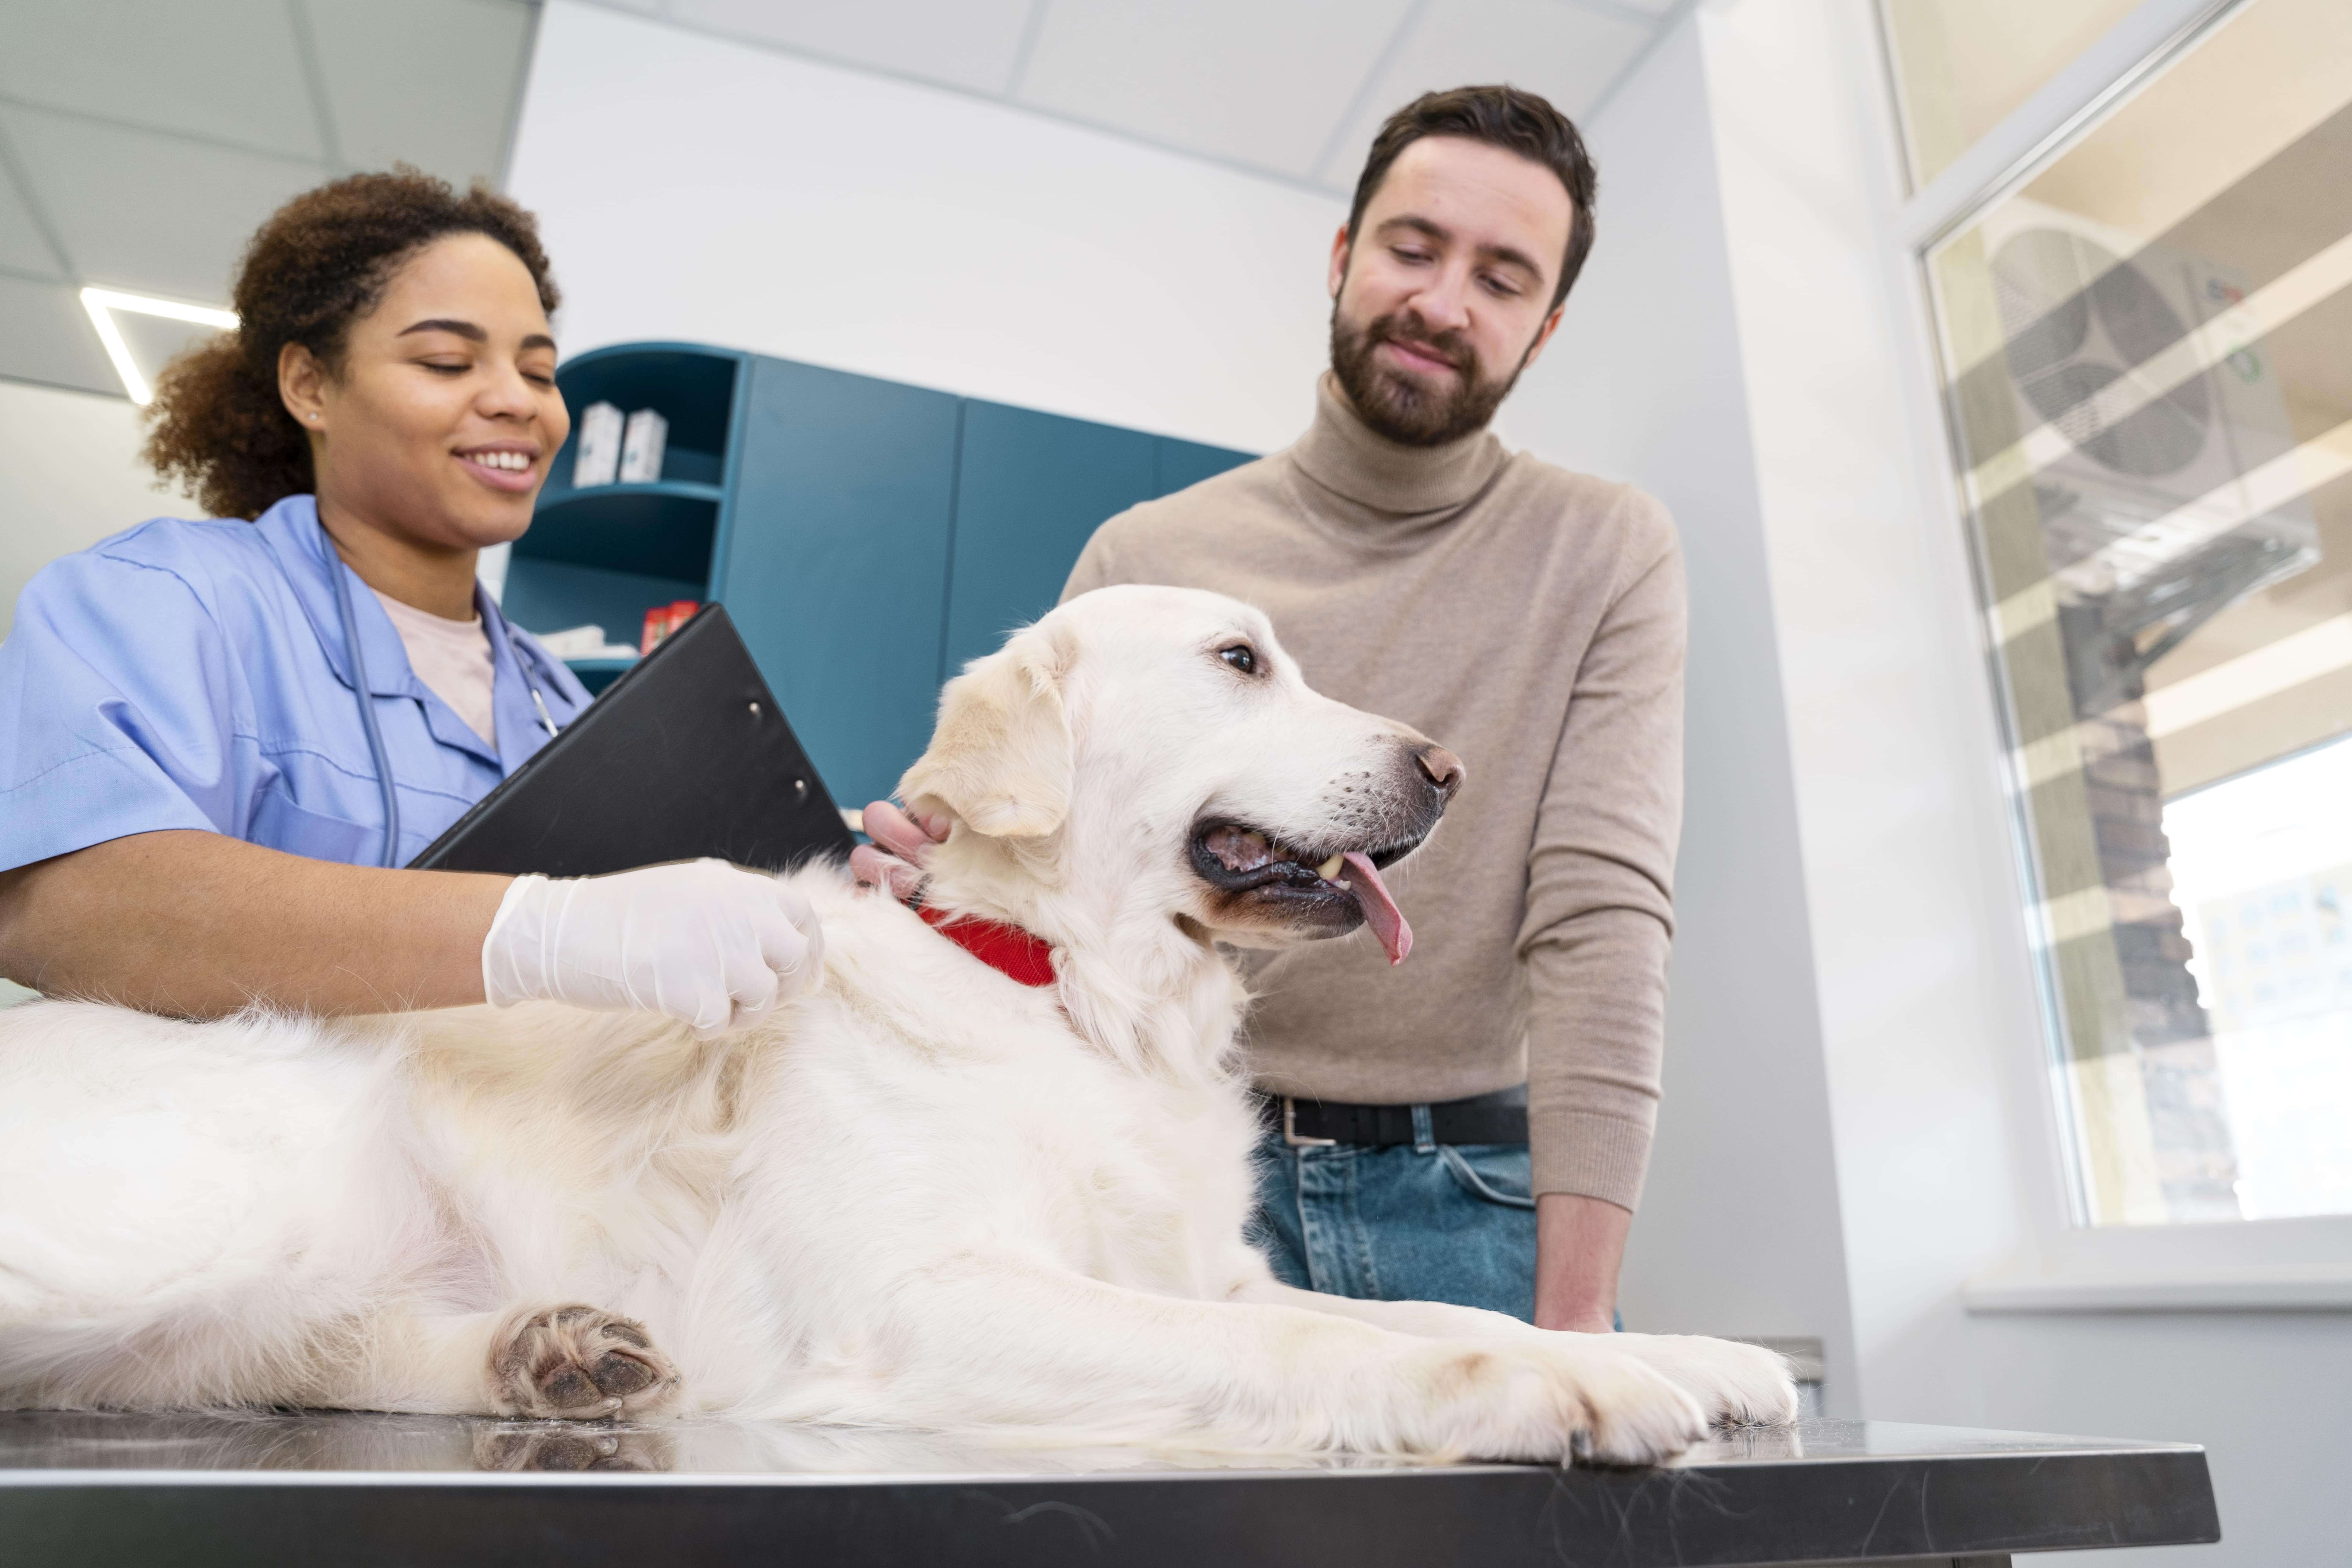 All About Orthopaedic Pet Surgery for Dogs in Dubai